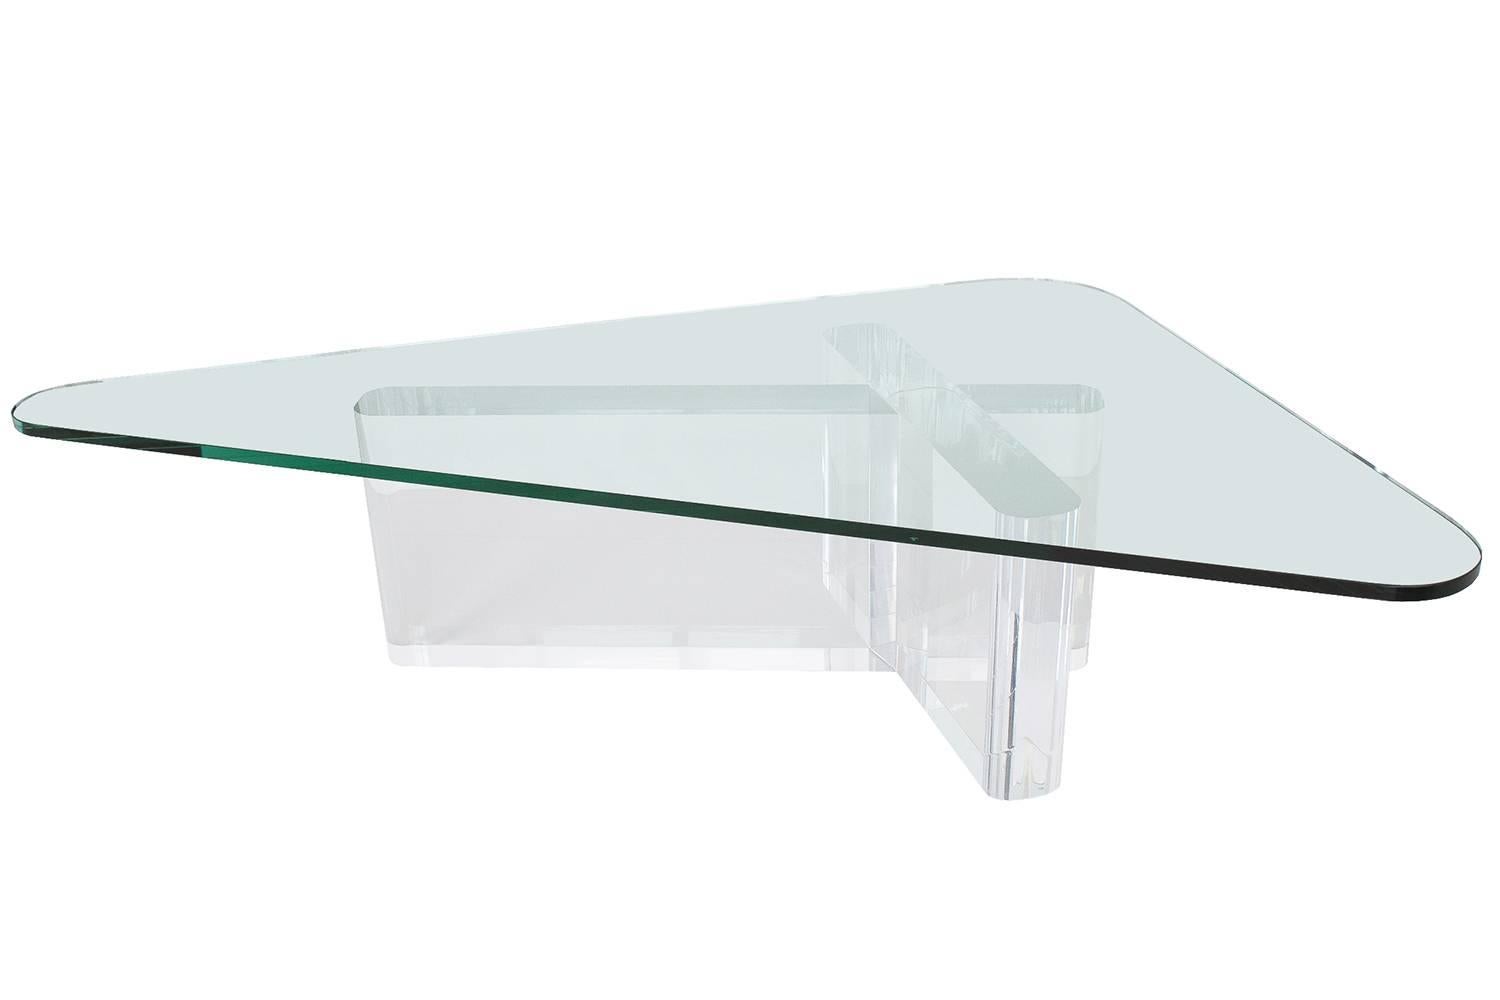 Cross shaped thick Lucite coffee table with triangular glass top by Lion in Frost. 4" thick clear Lucite with rounded ends. Three separate pieces of Lucite are positioned to create the sculptural base. 3/4" thick triangular glass top